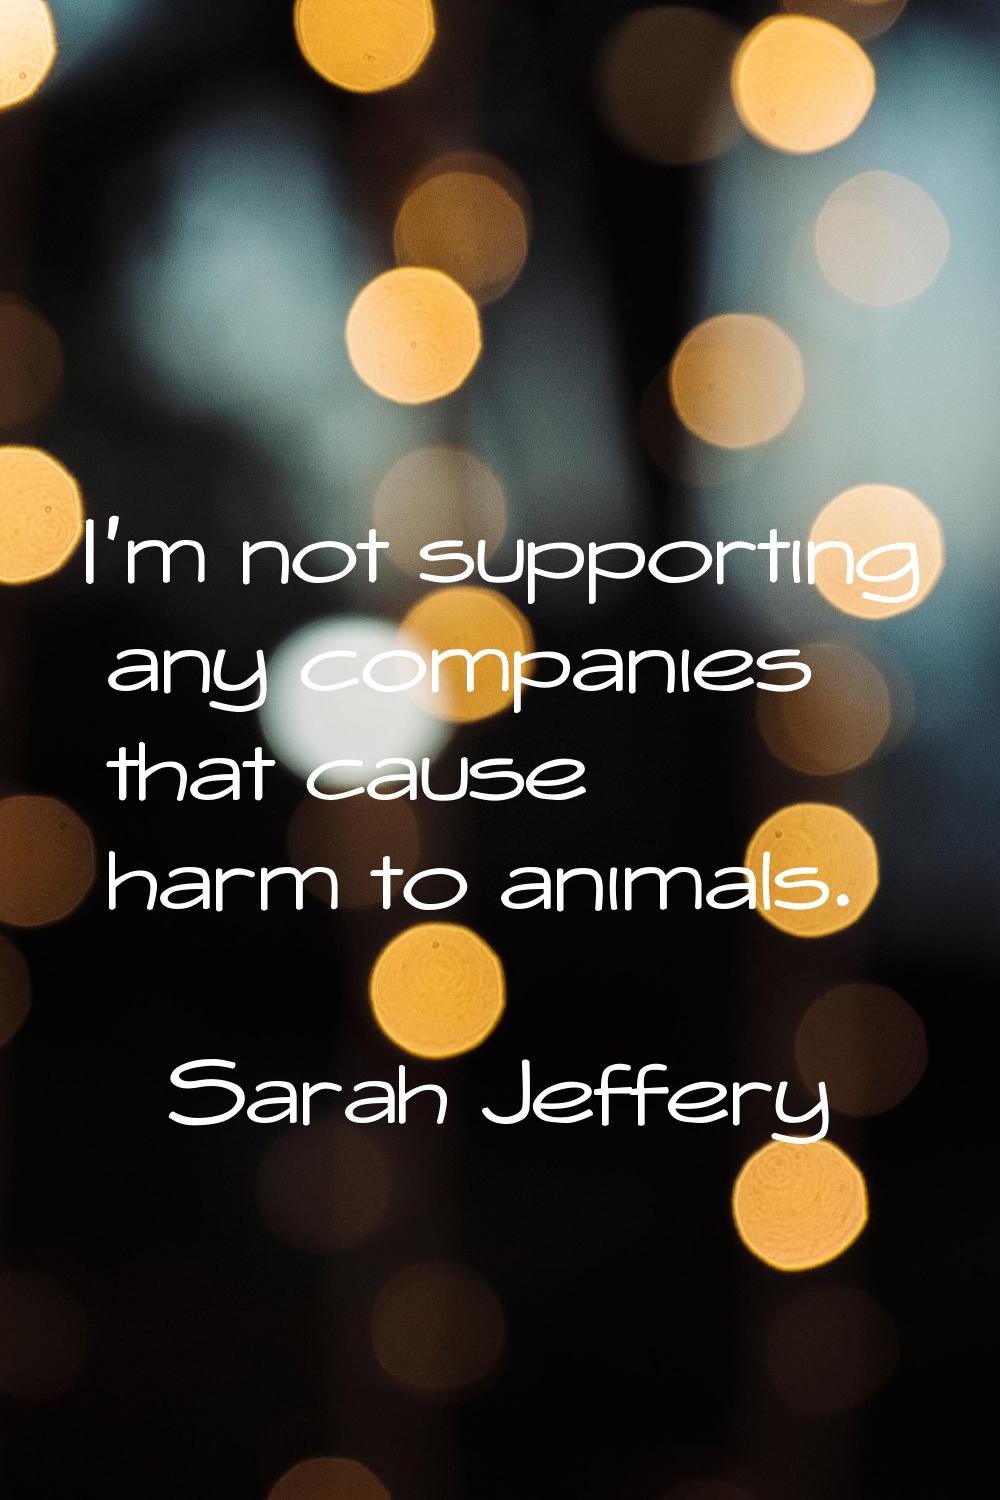 I'm not supporting any companies that cause harm to animals.